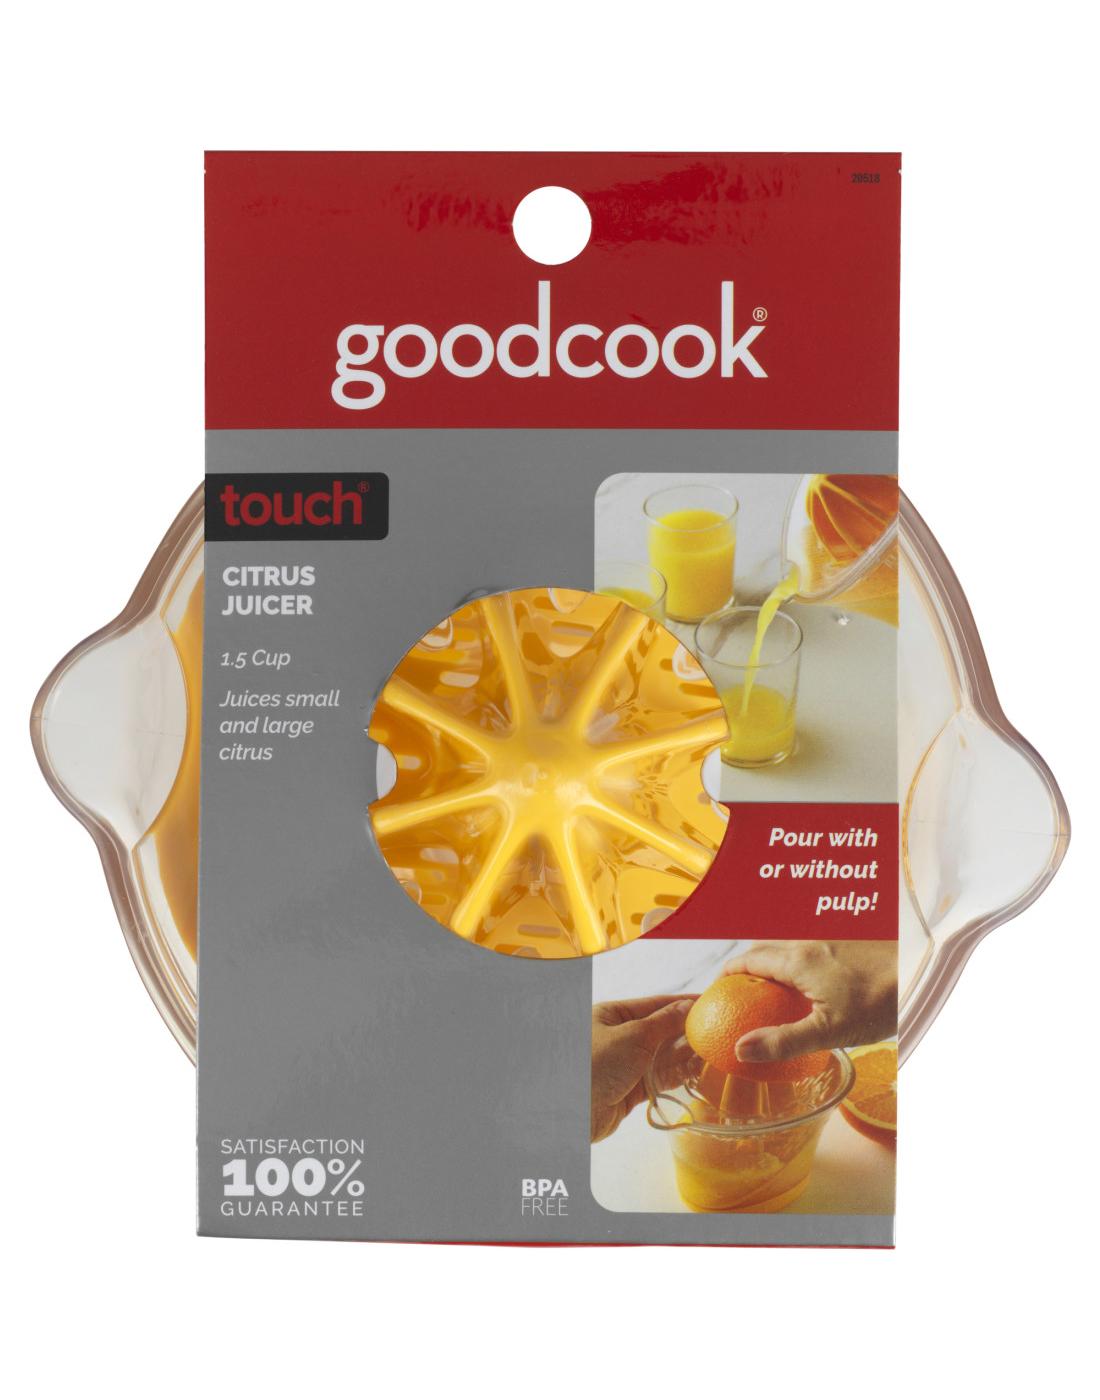 GoodCook Touch 2-in-1 Citrus Juicer; image 1 of 5